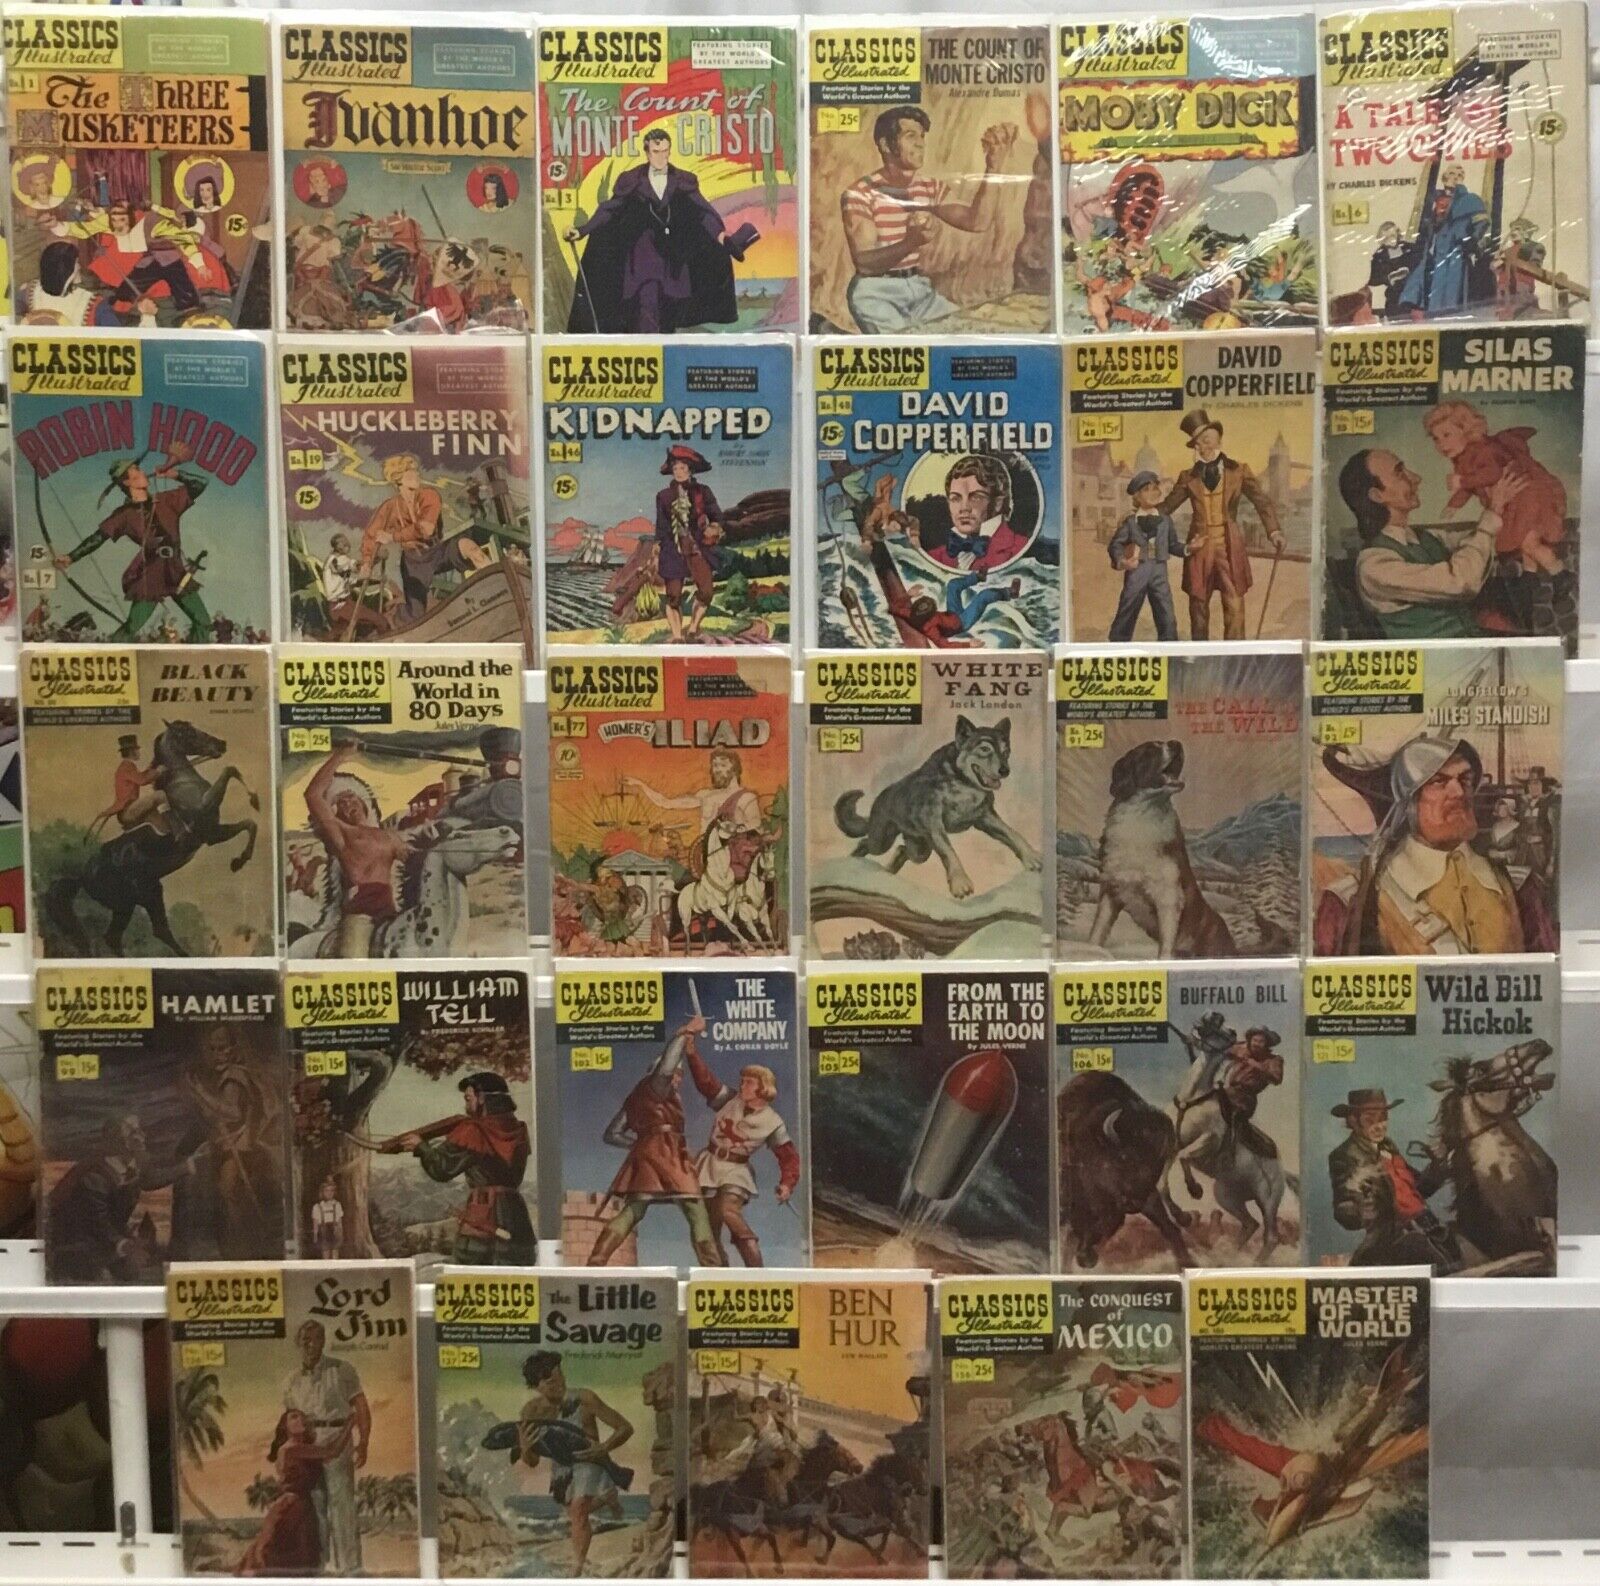 Gilberton Company - Vintage Classics Illustrated - Comic Book Lot of 29 Issues